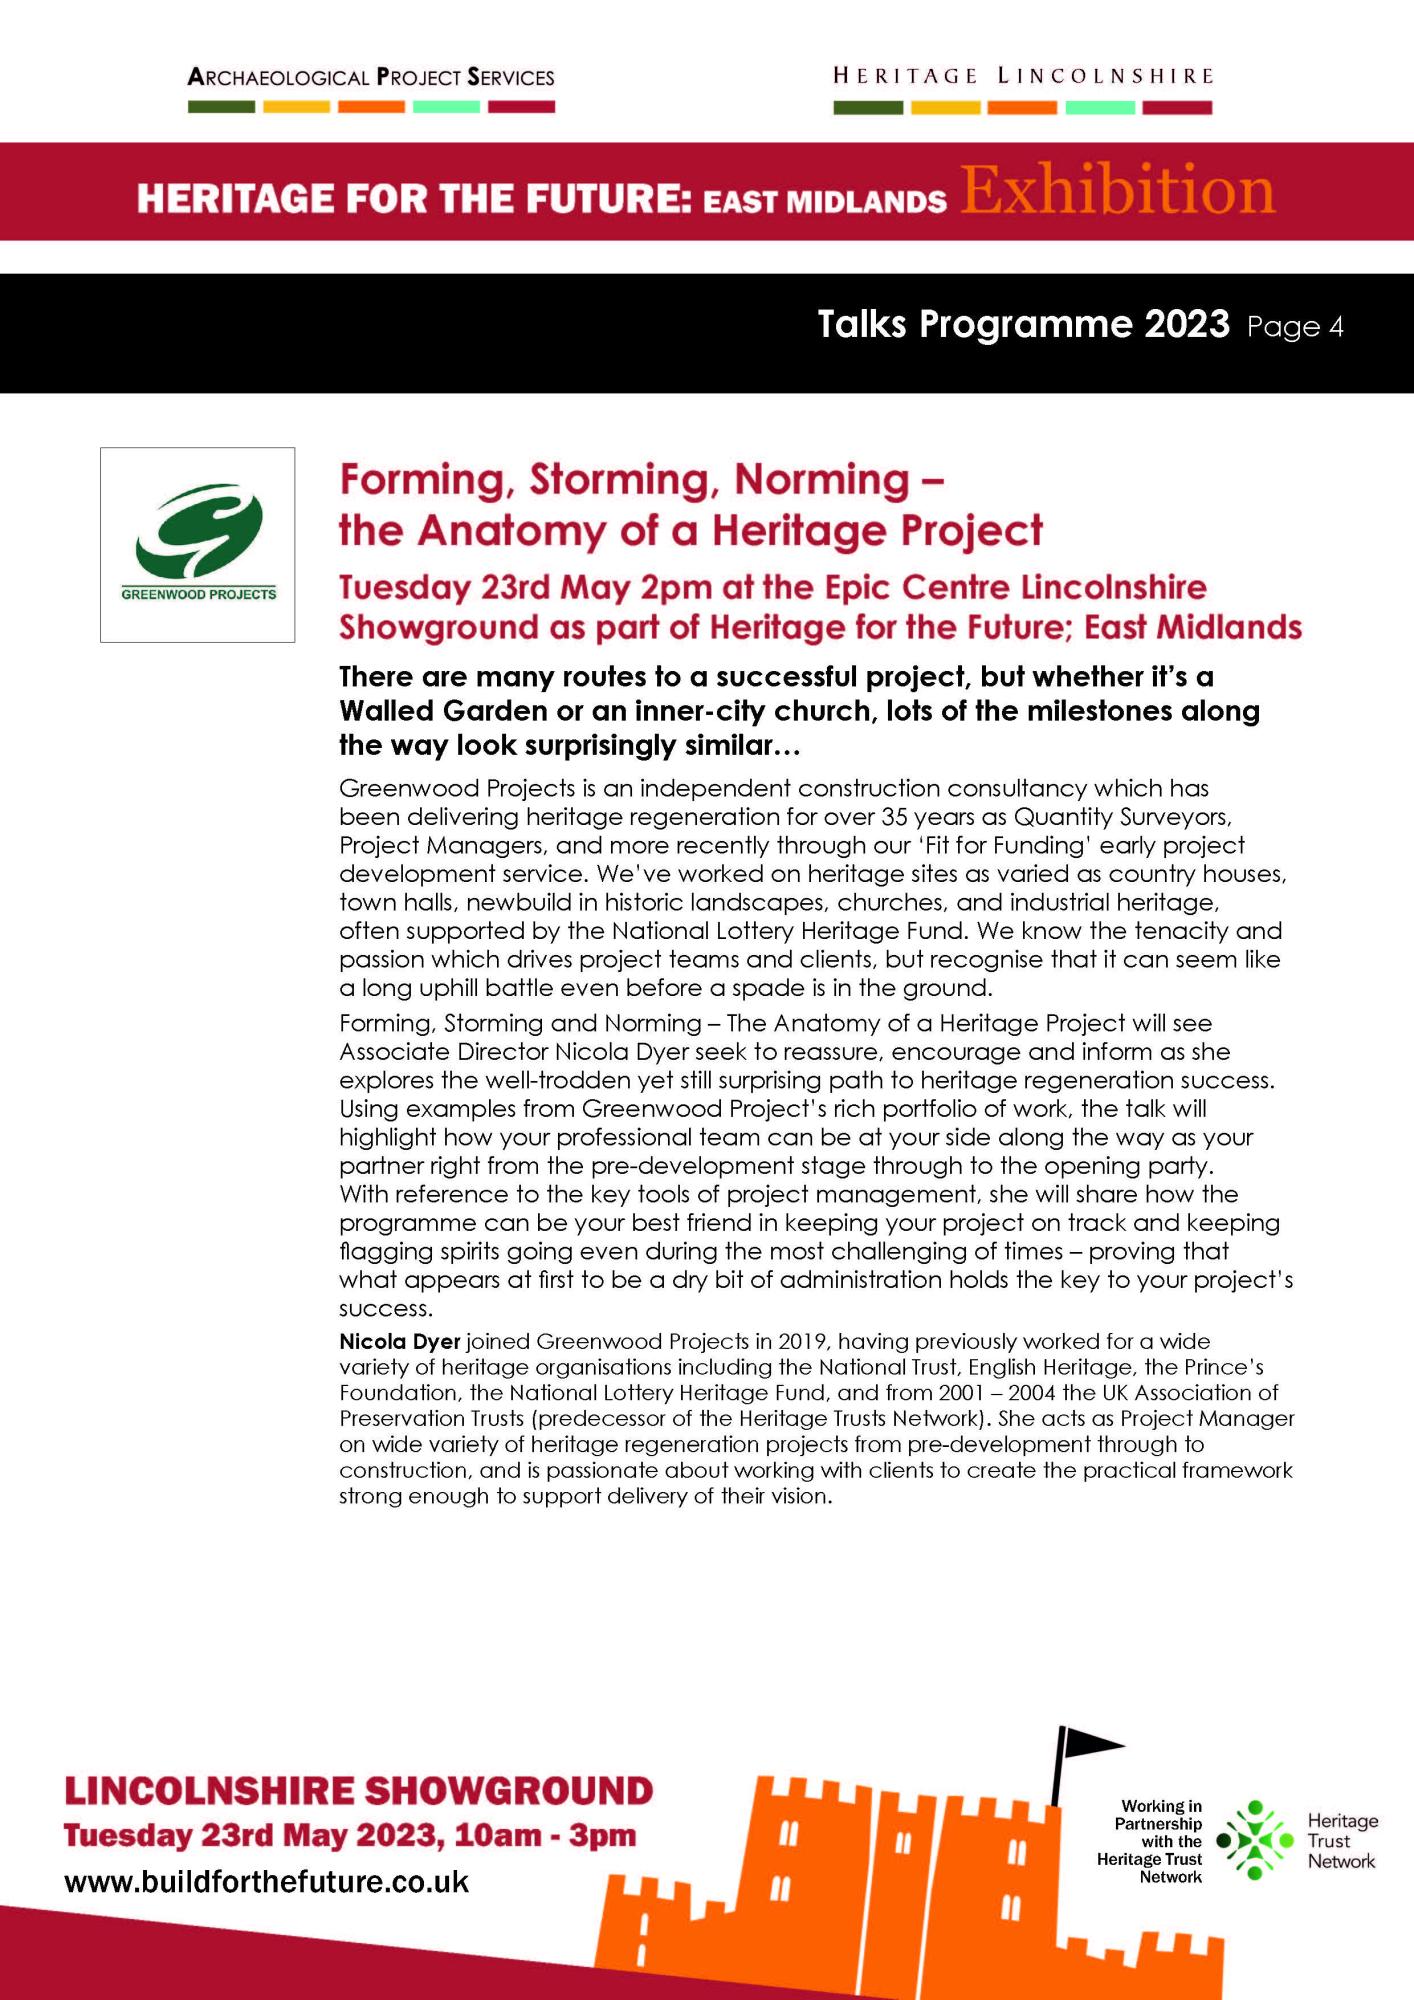 Forming, Storming, Norming – the Anatomy of a Heritage Project